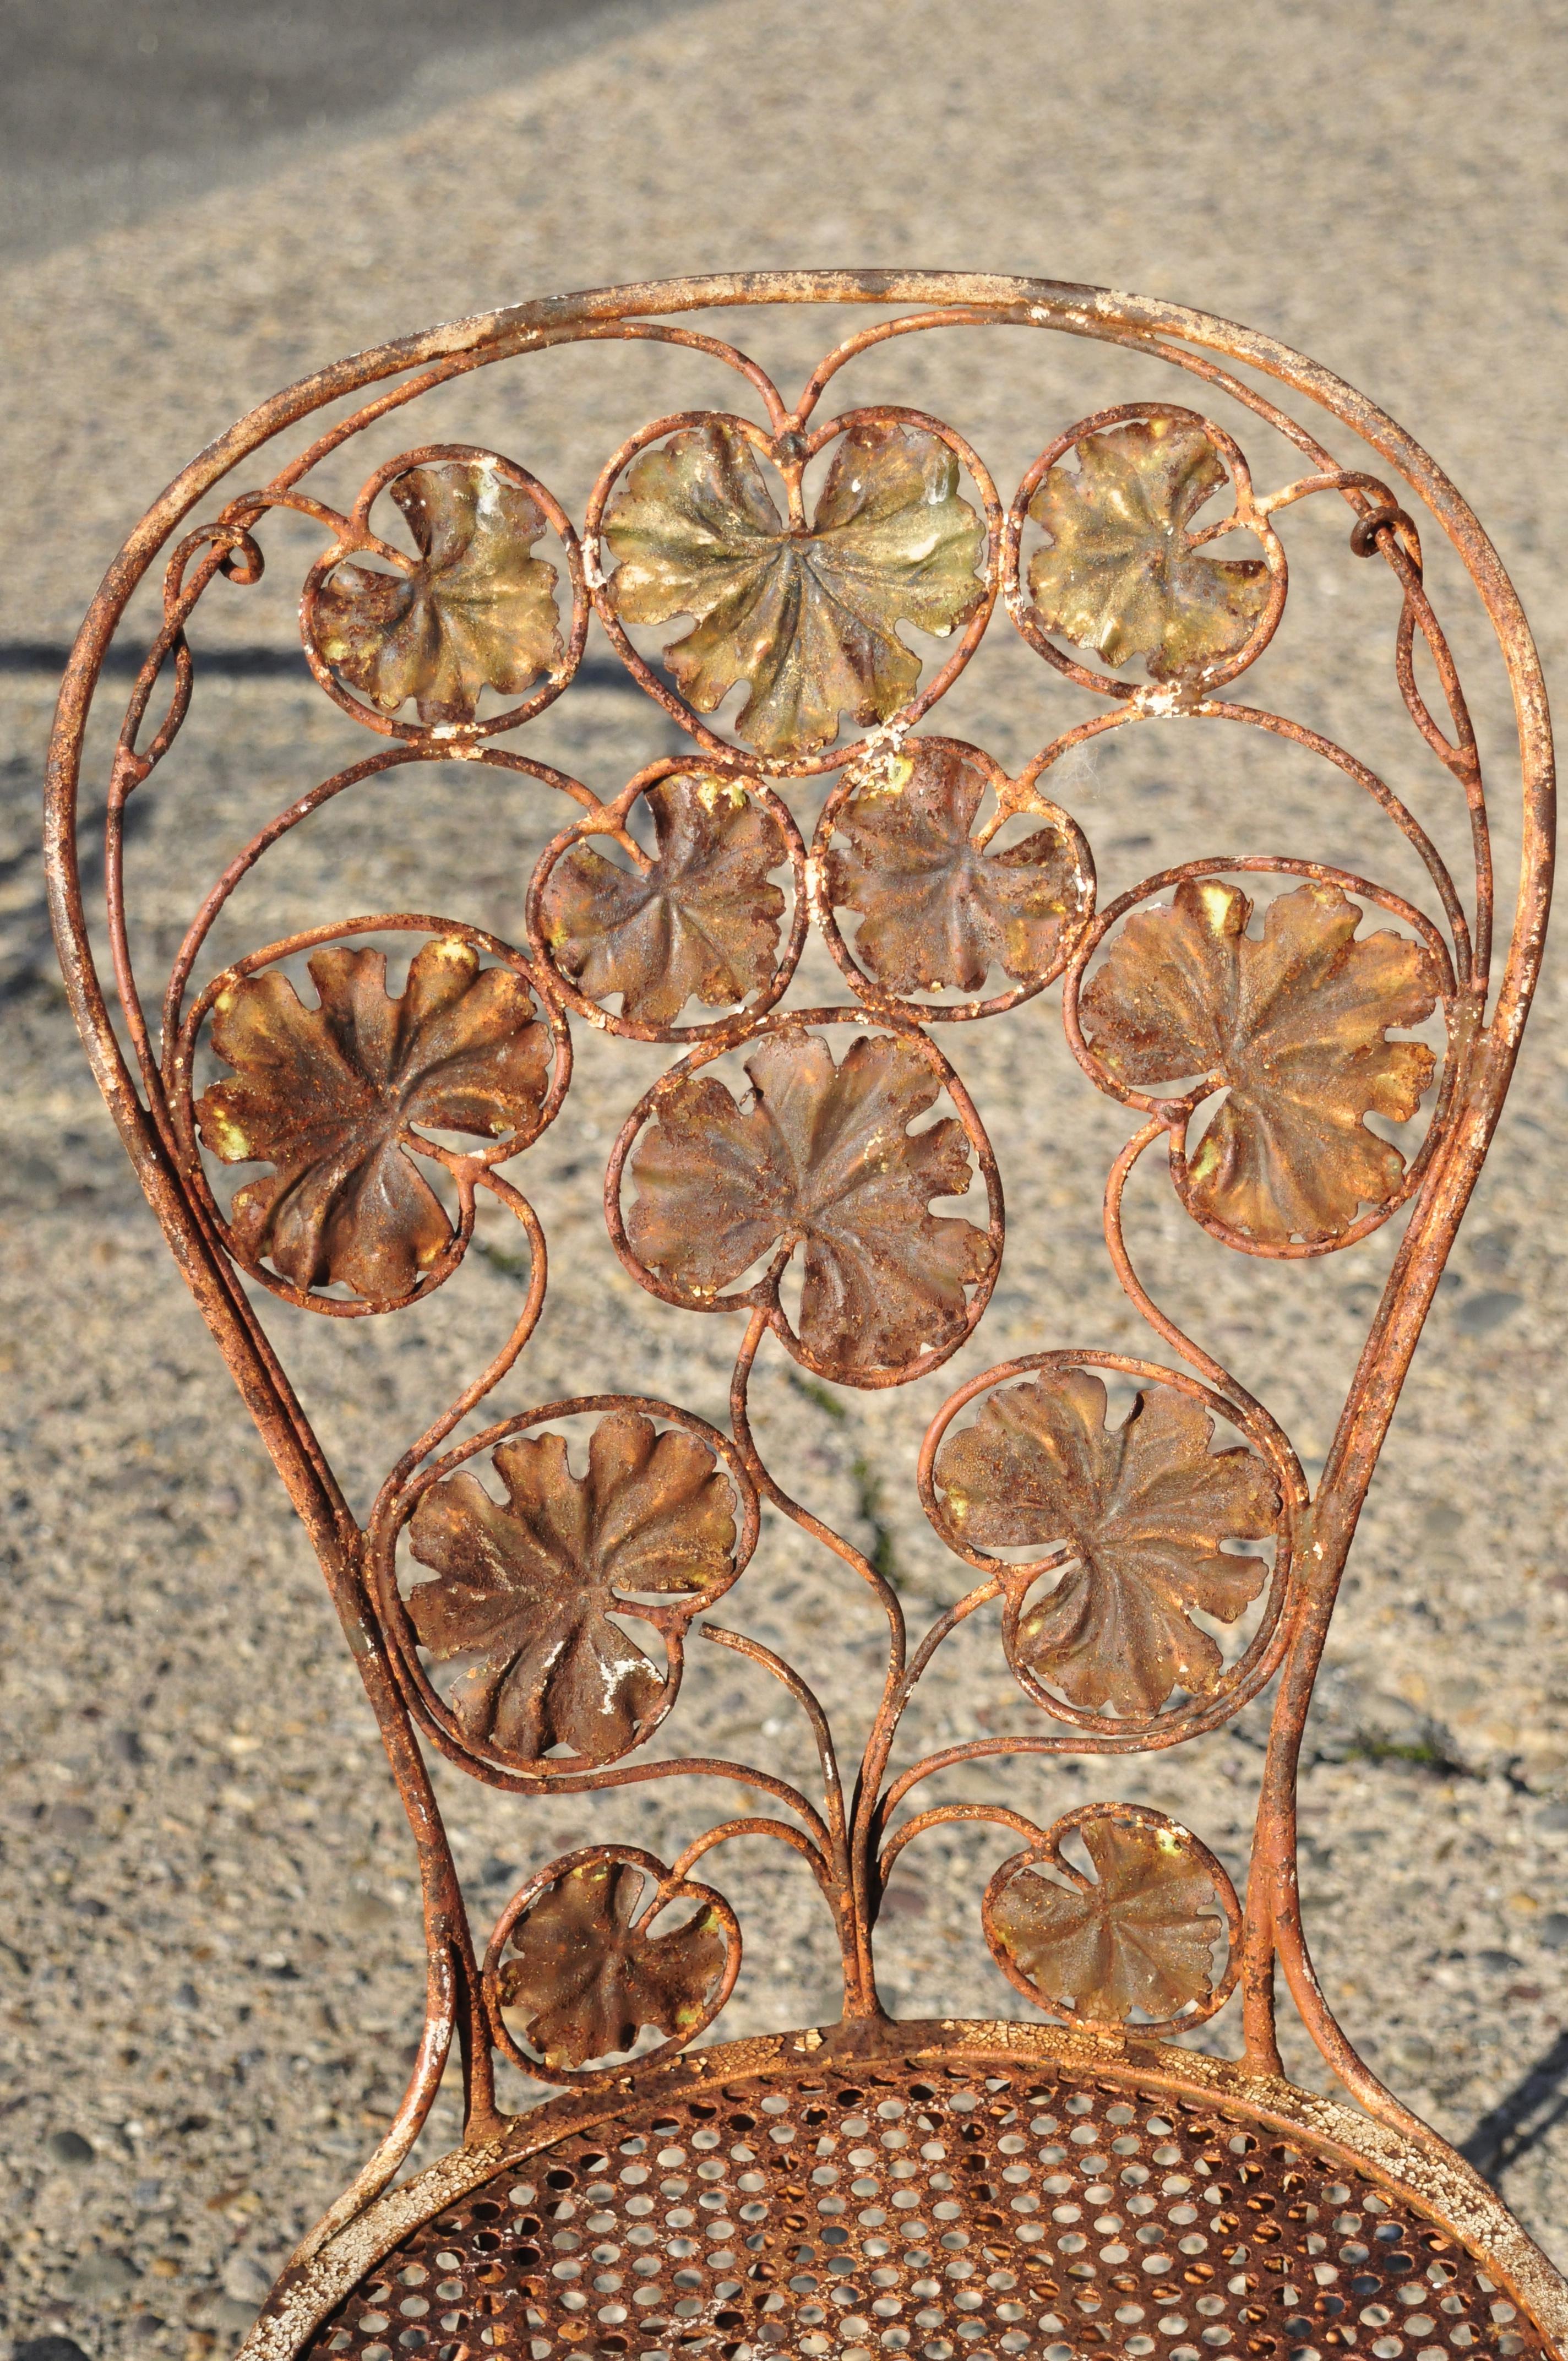 North American Antique French Art Nouveau Flower Maple Leaf Wrought Iron Garden Chairs, a Pair